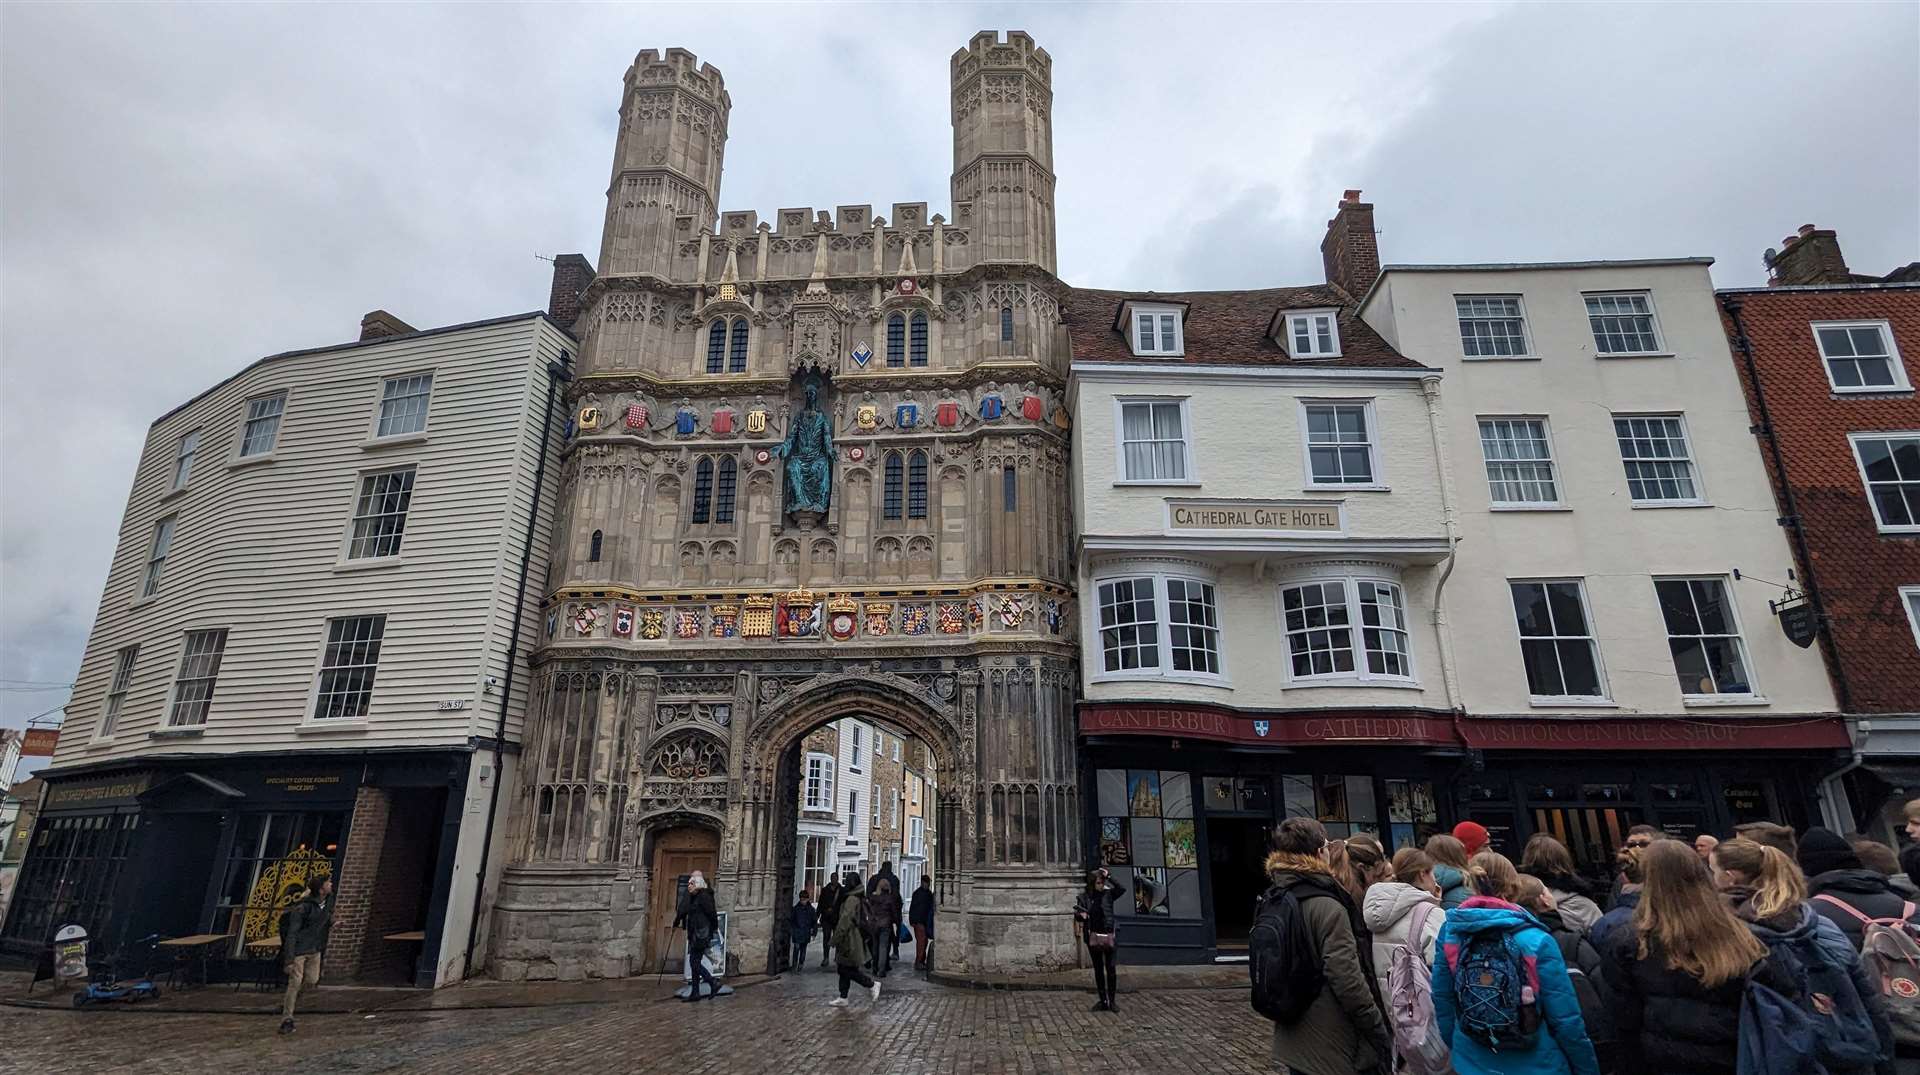 The start of the walk in the Buttermarket in Canterbury